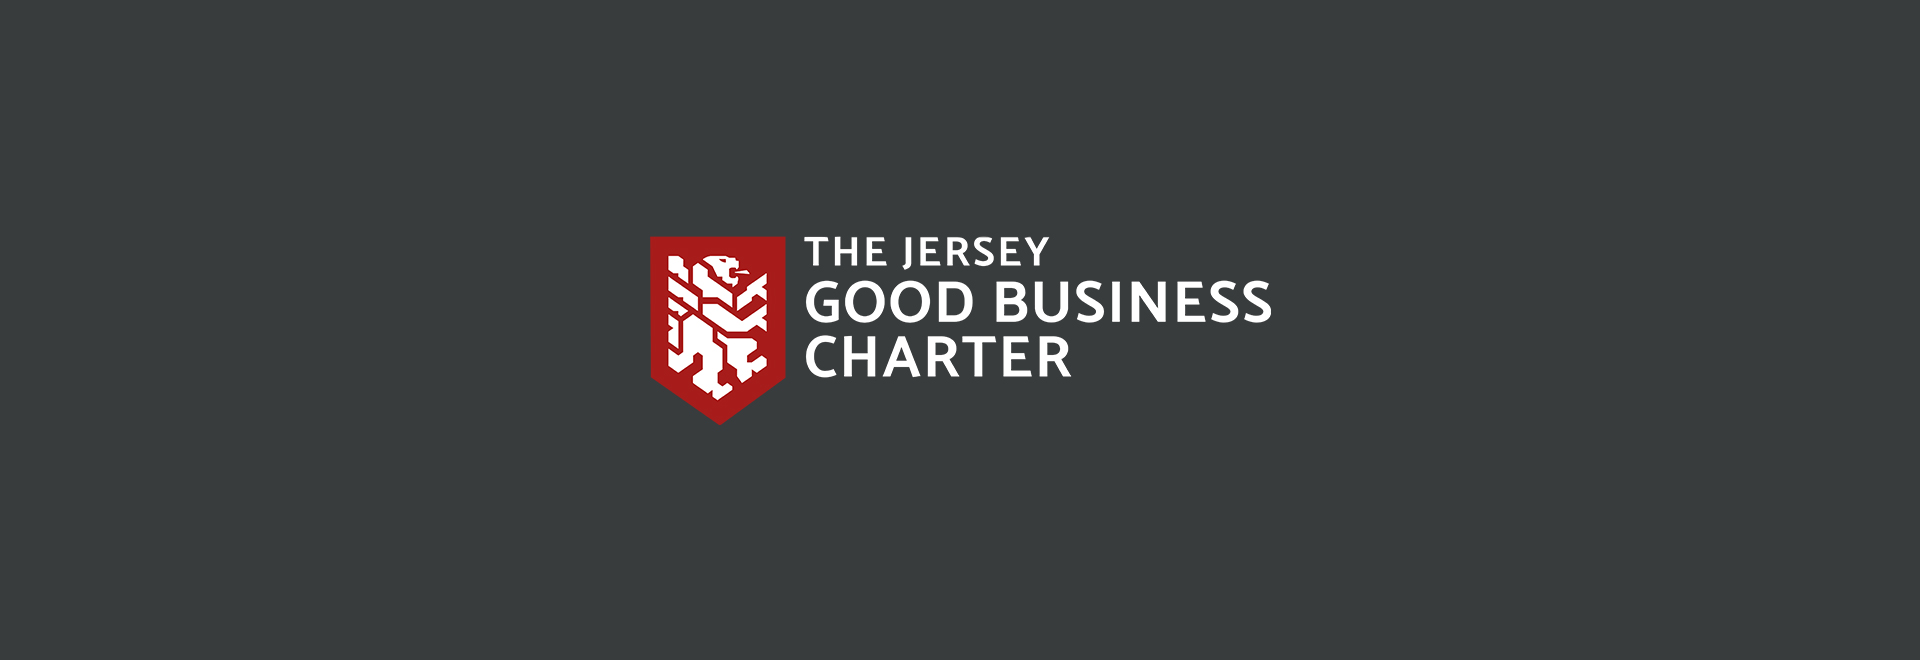 Accuro Jersey is accredited by the Jersey Good Business Charter